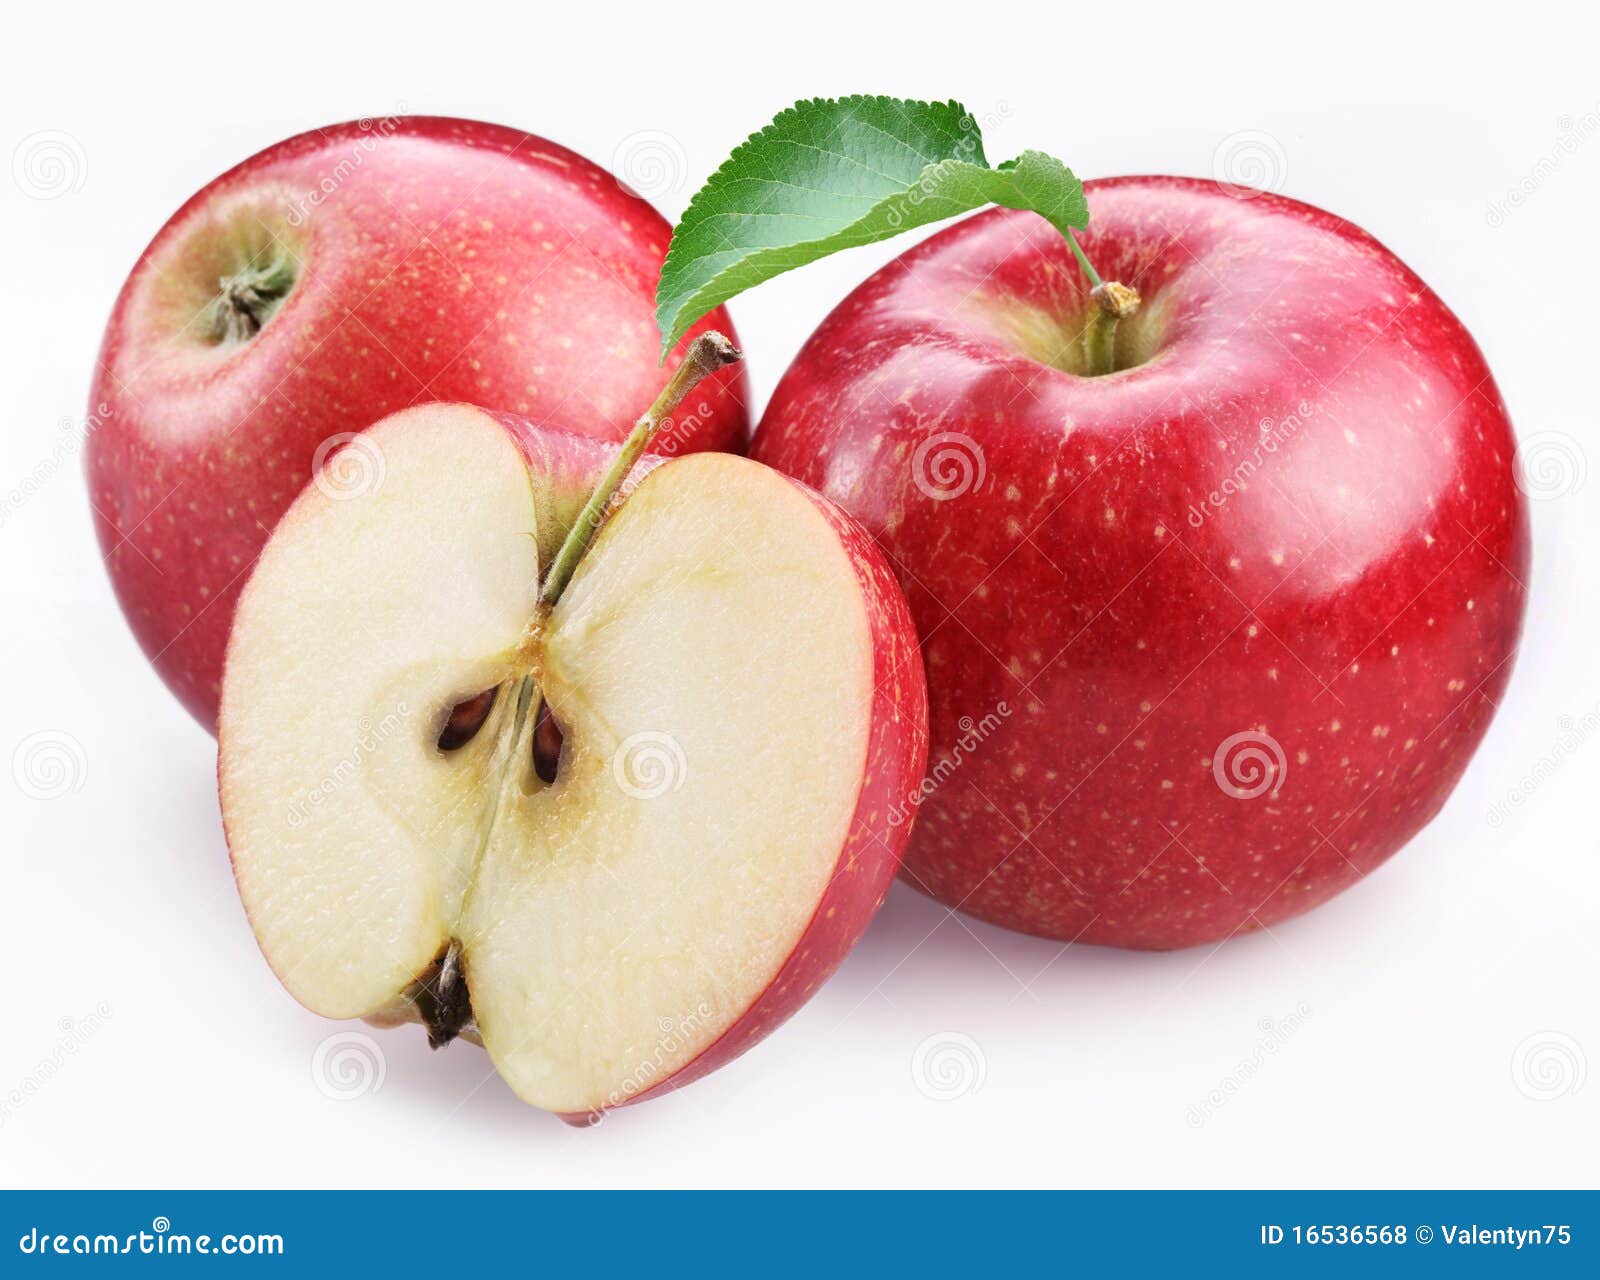 two ripe red apples and half of apple.